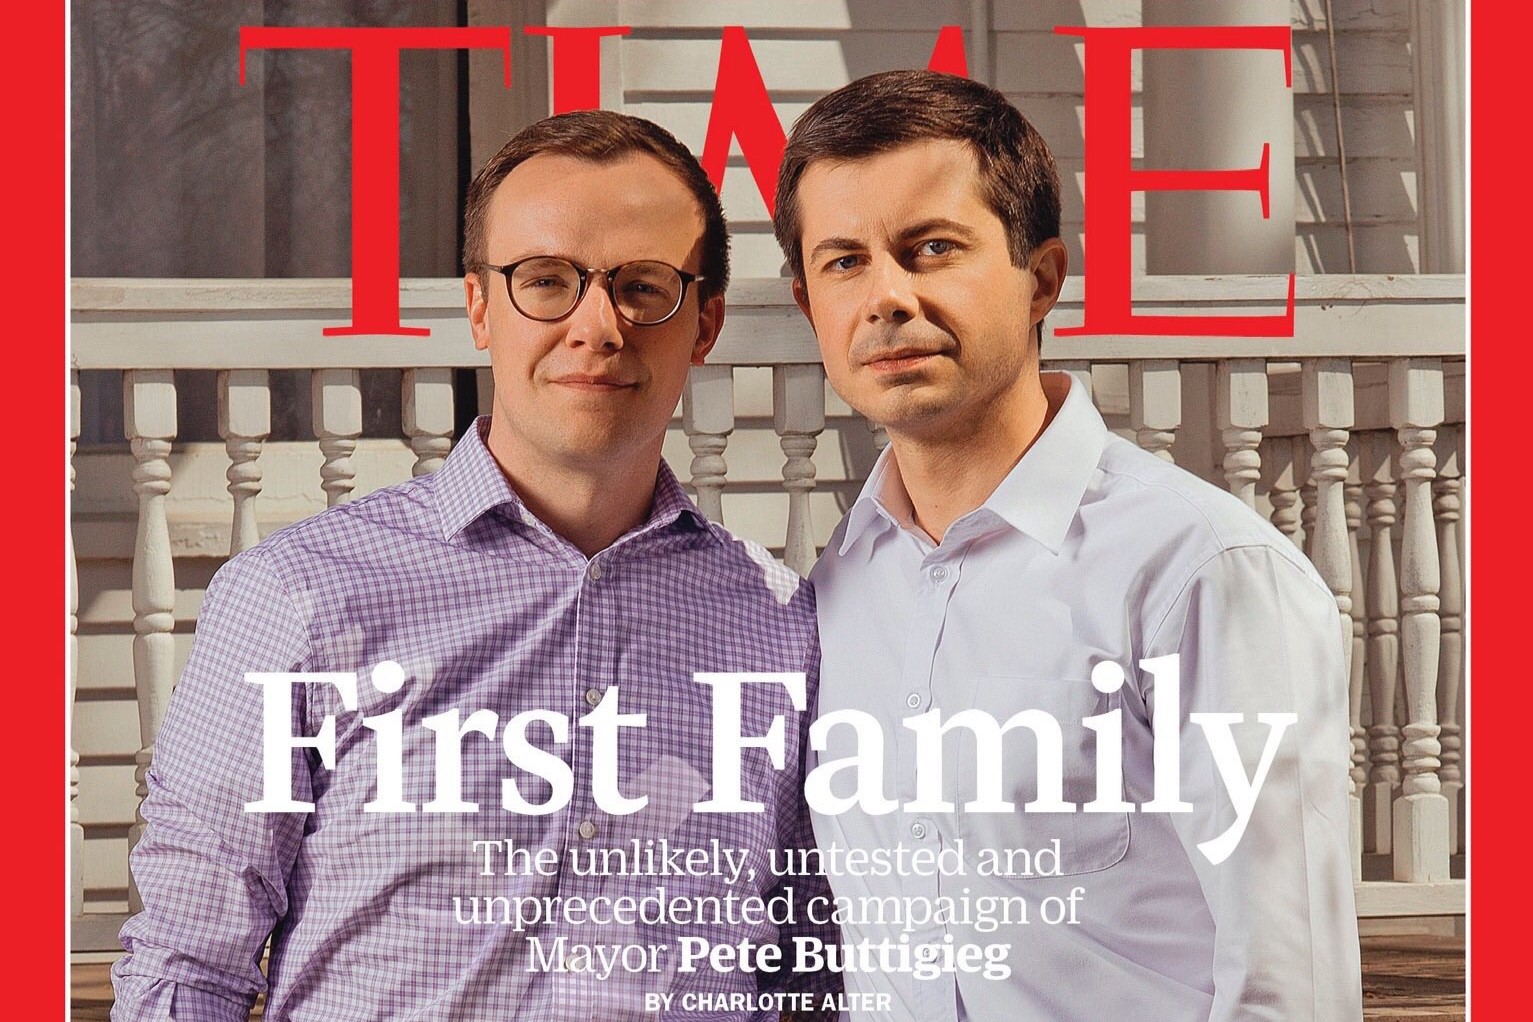 Pete Buttigieg and husband Chasten dubbed 'First Family' on cover of Time - Metro Weekly